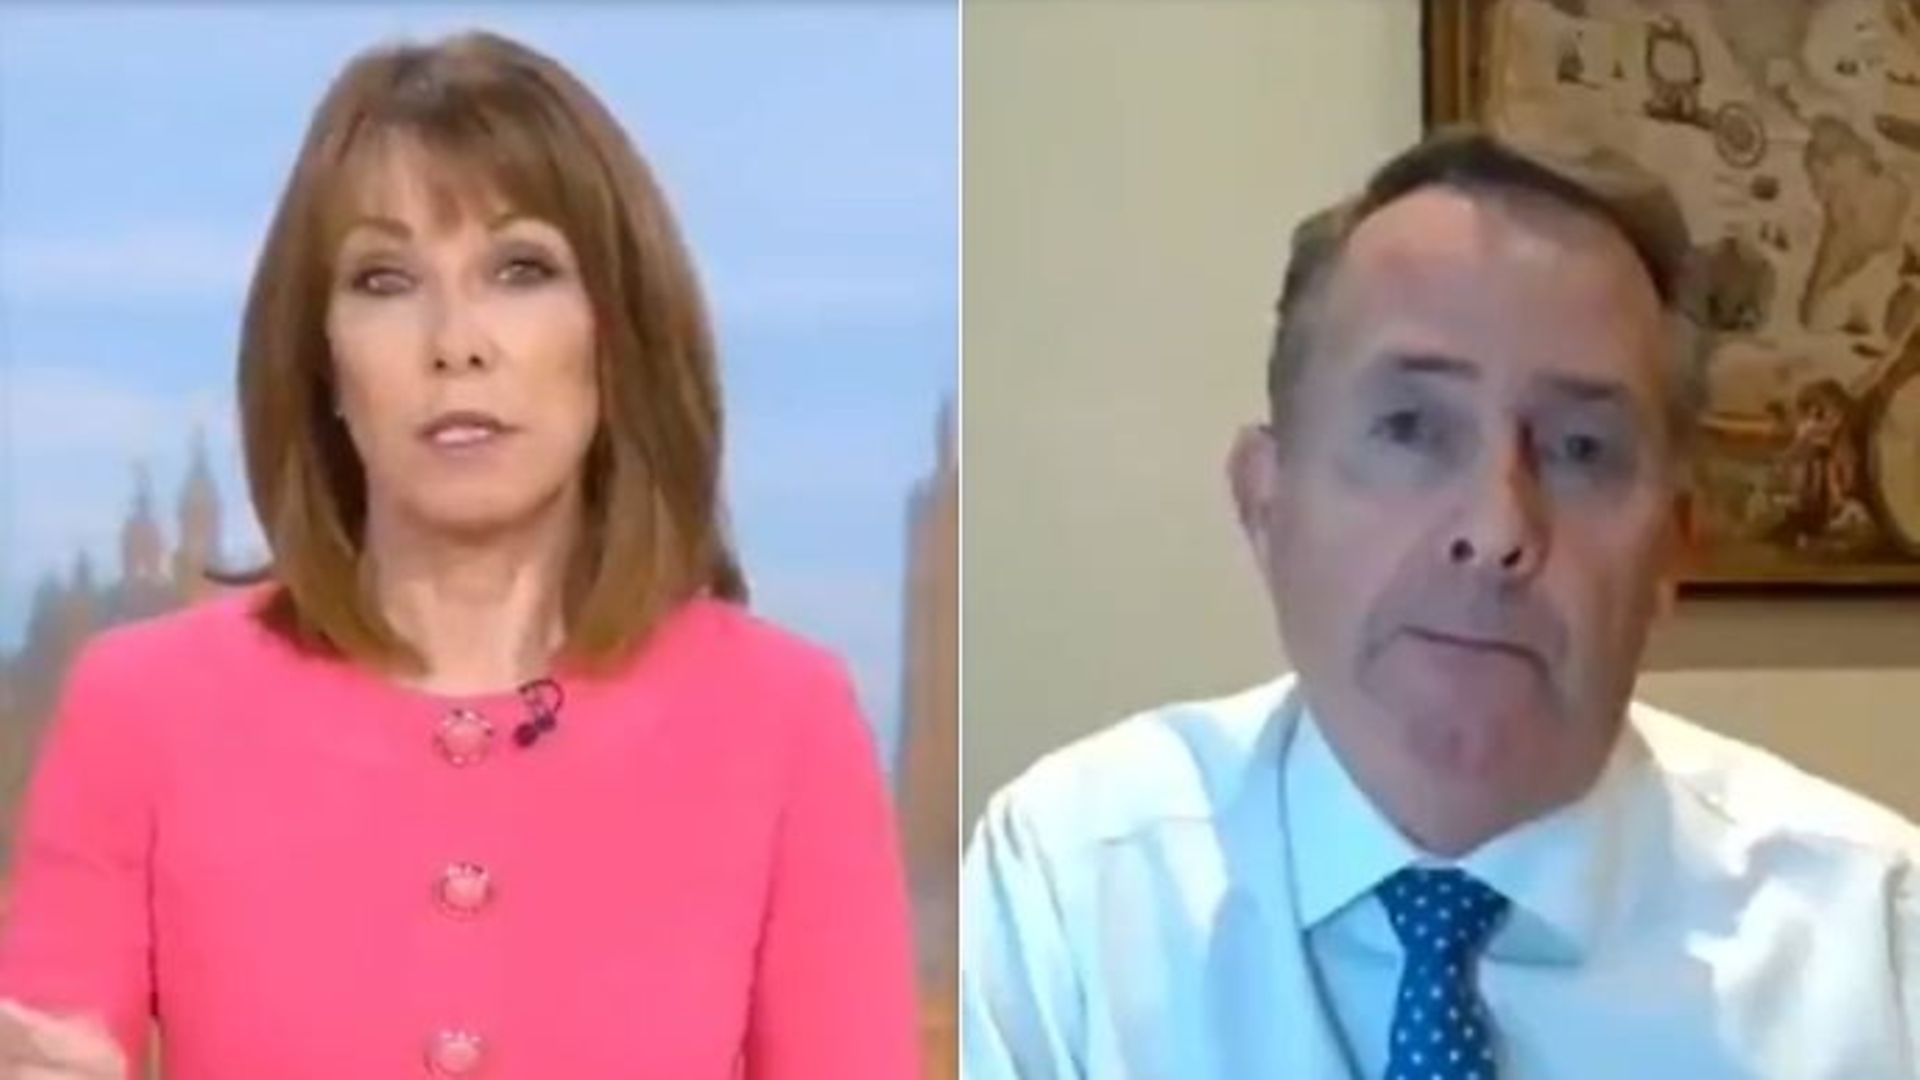 Kay Burley (L) and former international trade minister Liam Fox on Sky News - Credit: Twitter